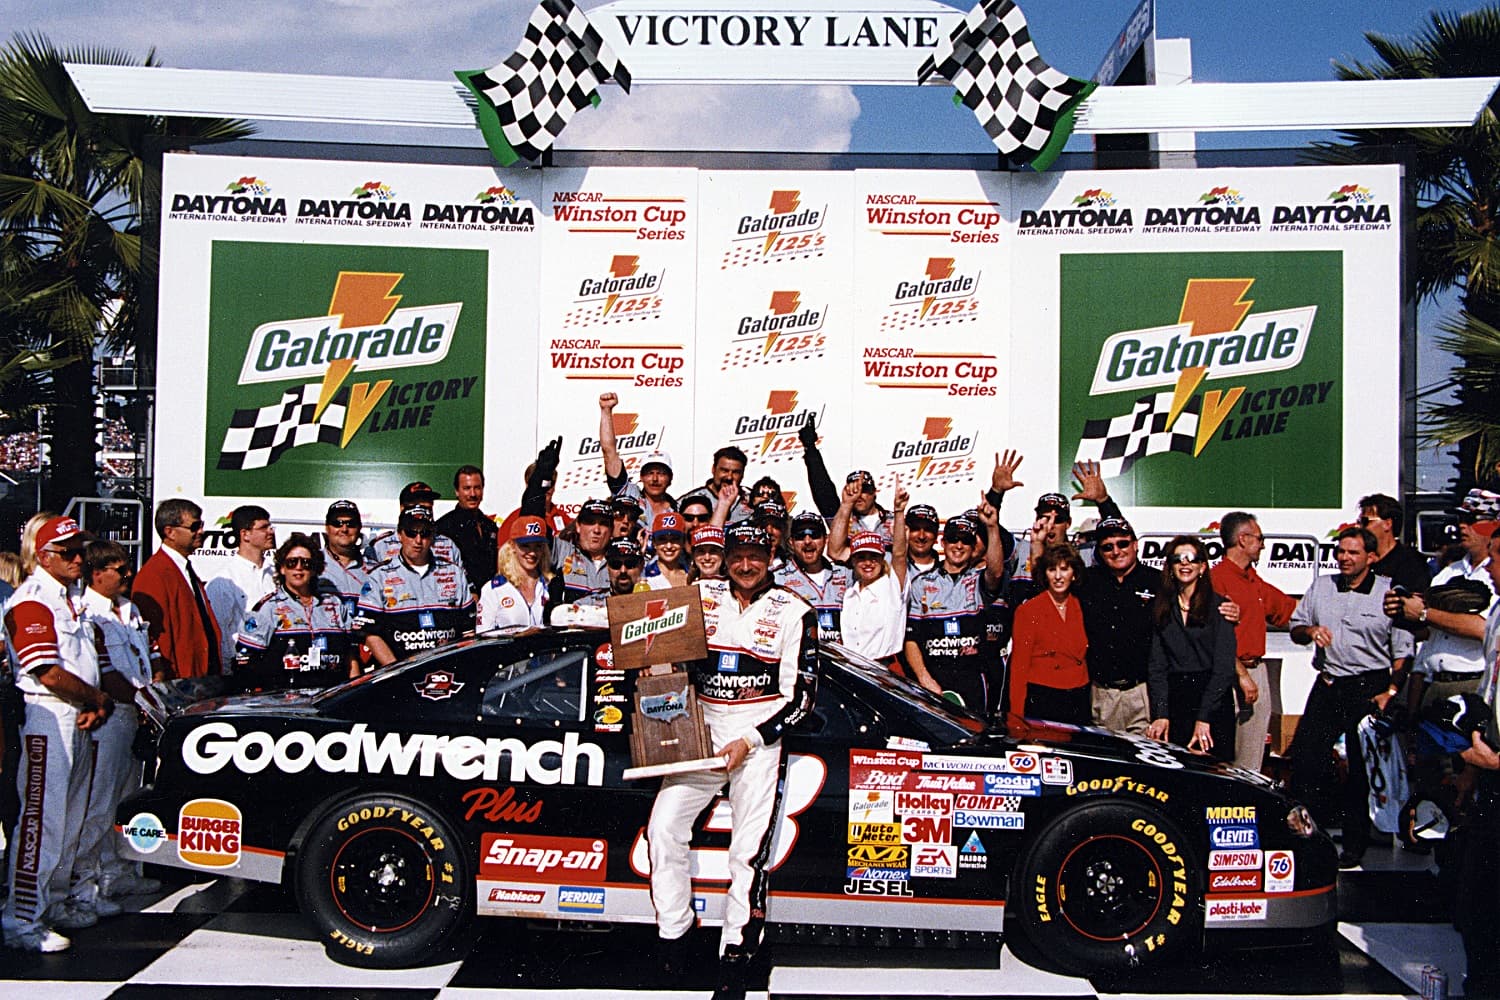 Dale Earnhardt and his crew celebrate at Daytona International Speedway after a win in one of the Gatorade 125 qualifying races for the 1997 Daytona 500.